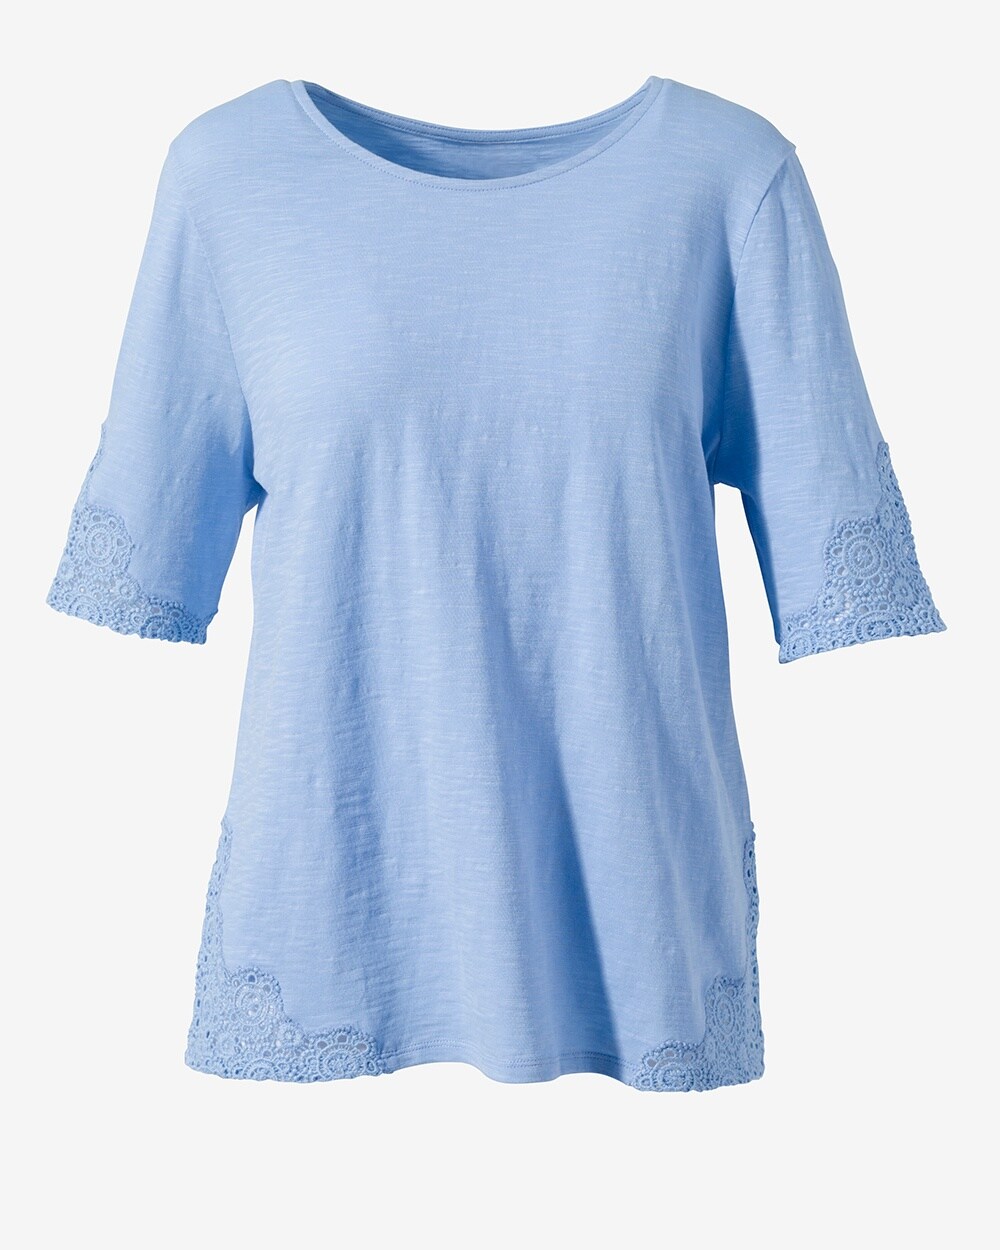 Lace-Trimmed Scoop-Neck Tee